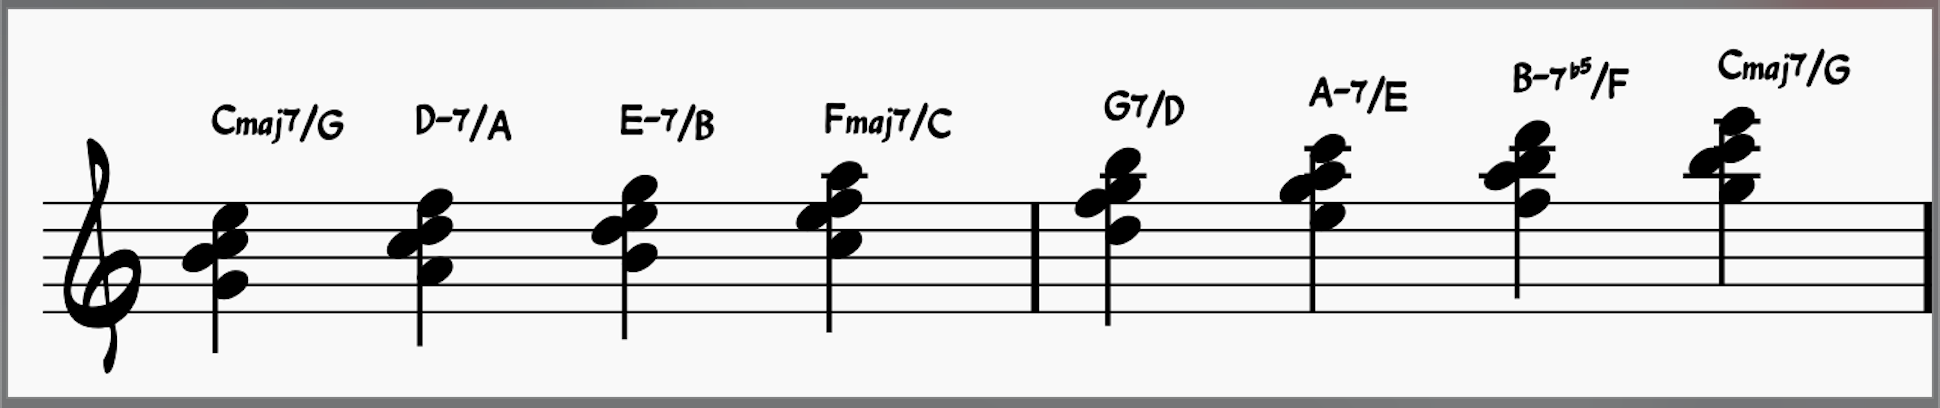 Piano chord inversions: C major chord scale in second inversion